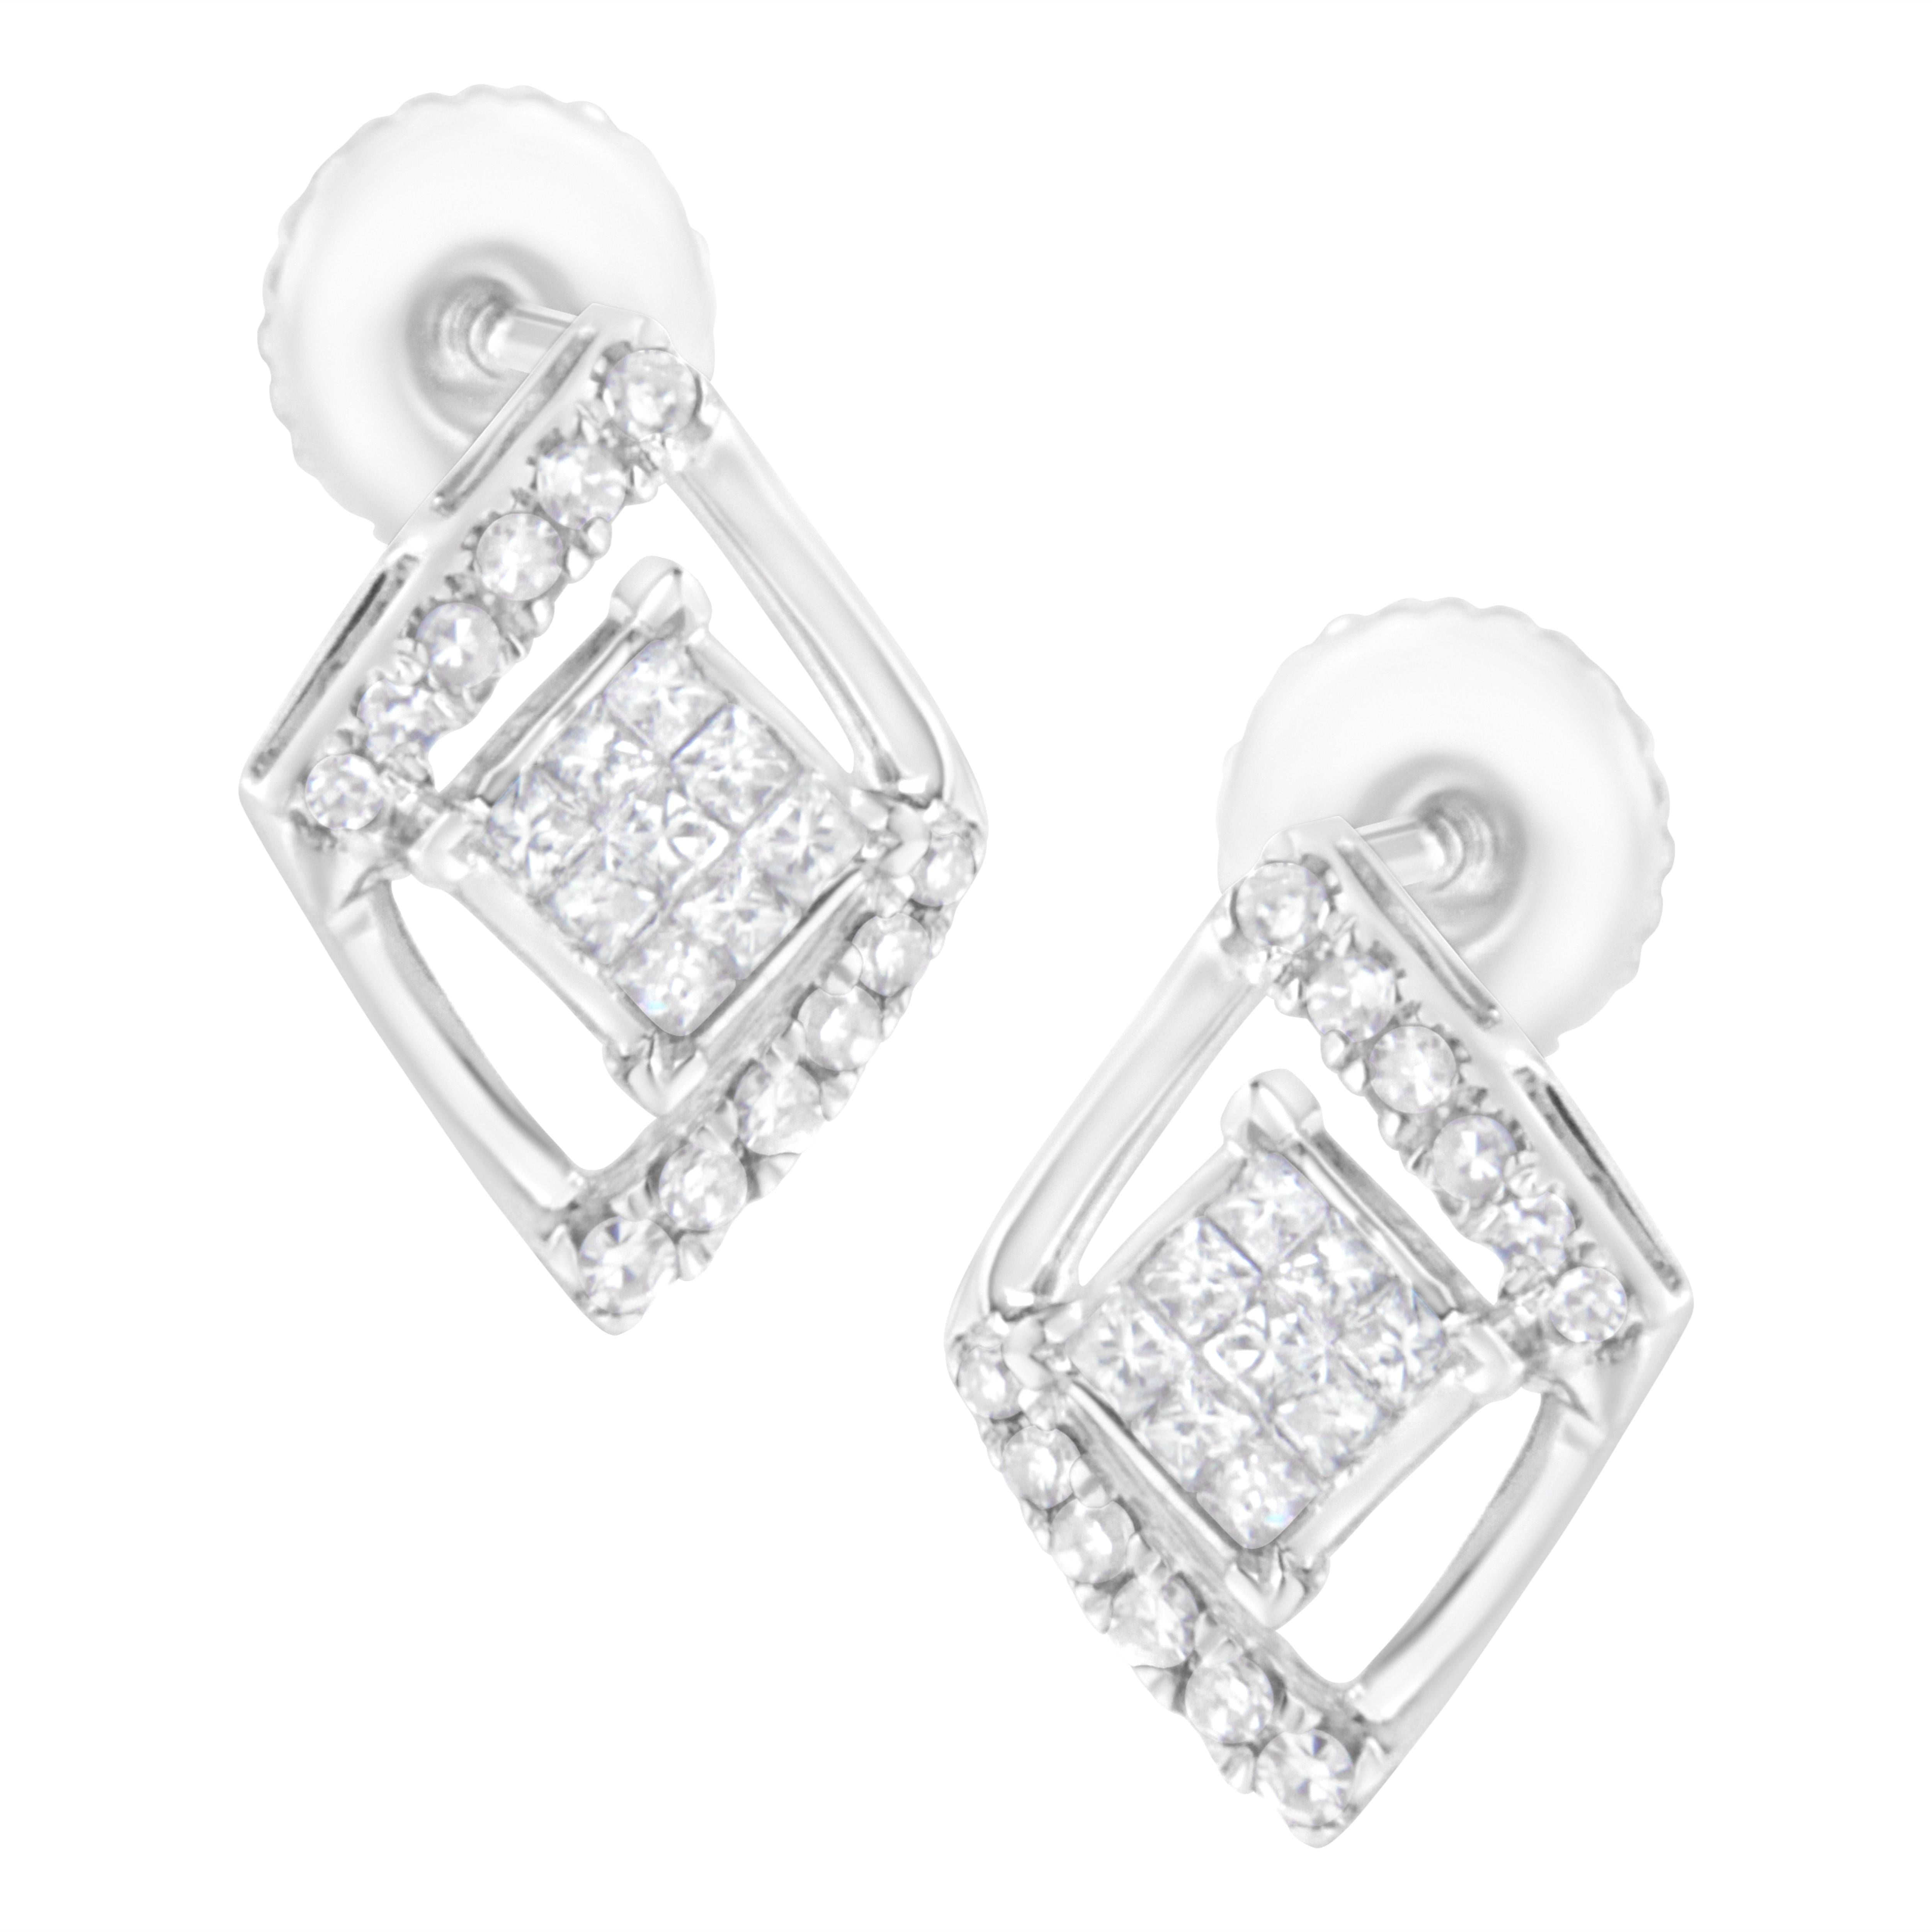 Stand out with these stunning geometrical shaped studs. Shimmering princess cut diamonds in an invisible setting create a square cluster that sits inside a rhombus shaped floating halo. The halo is inlaid on two opposite sides with round cut